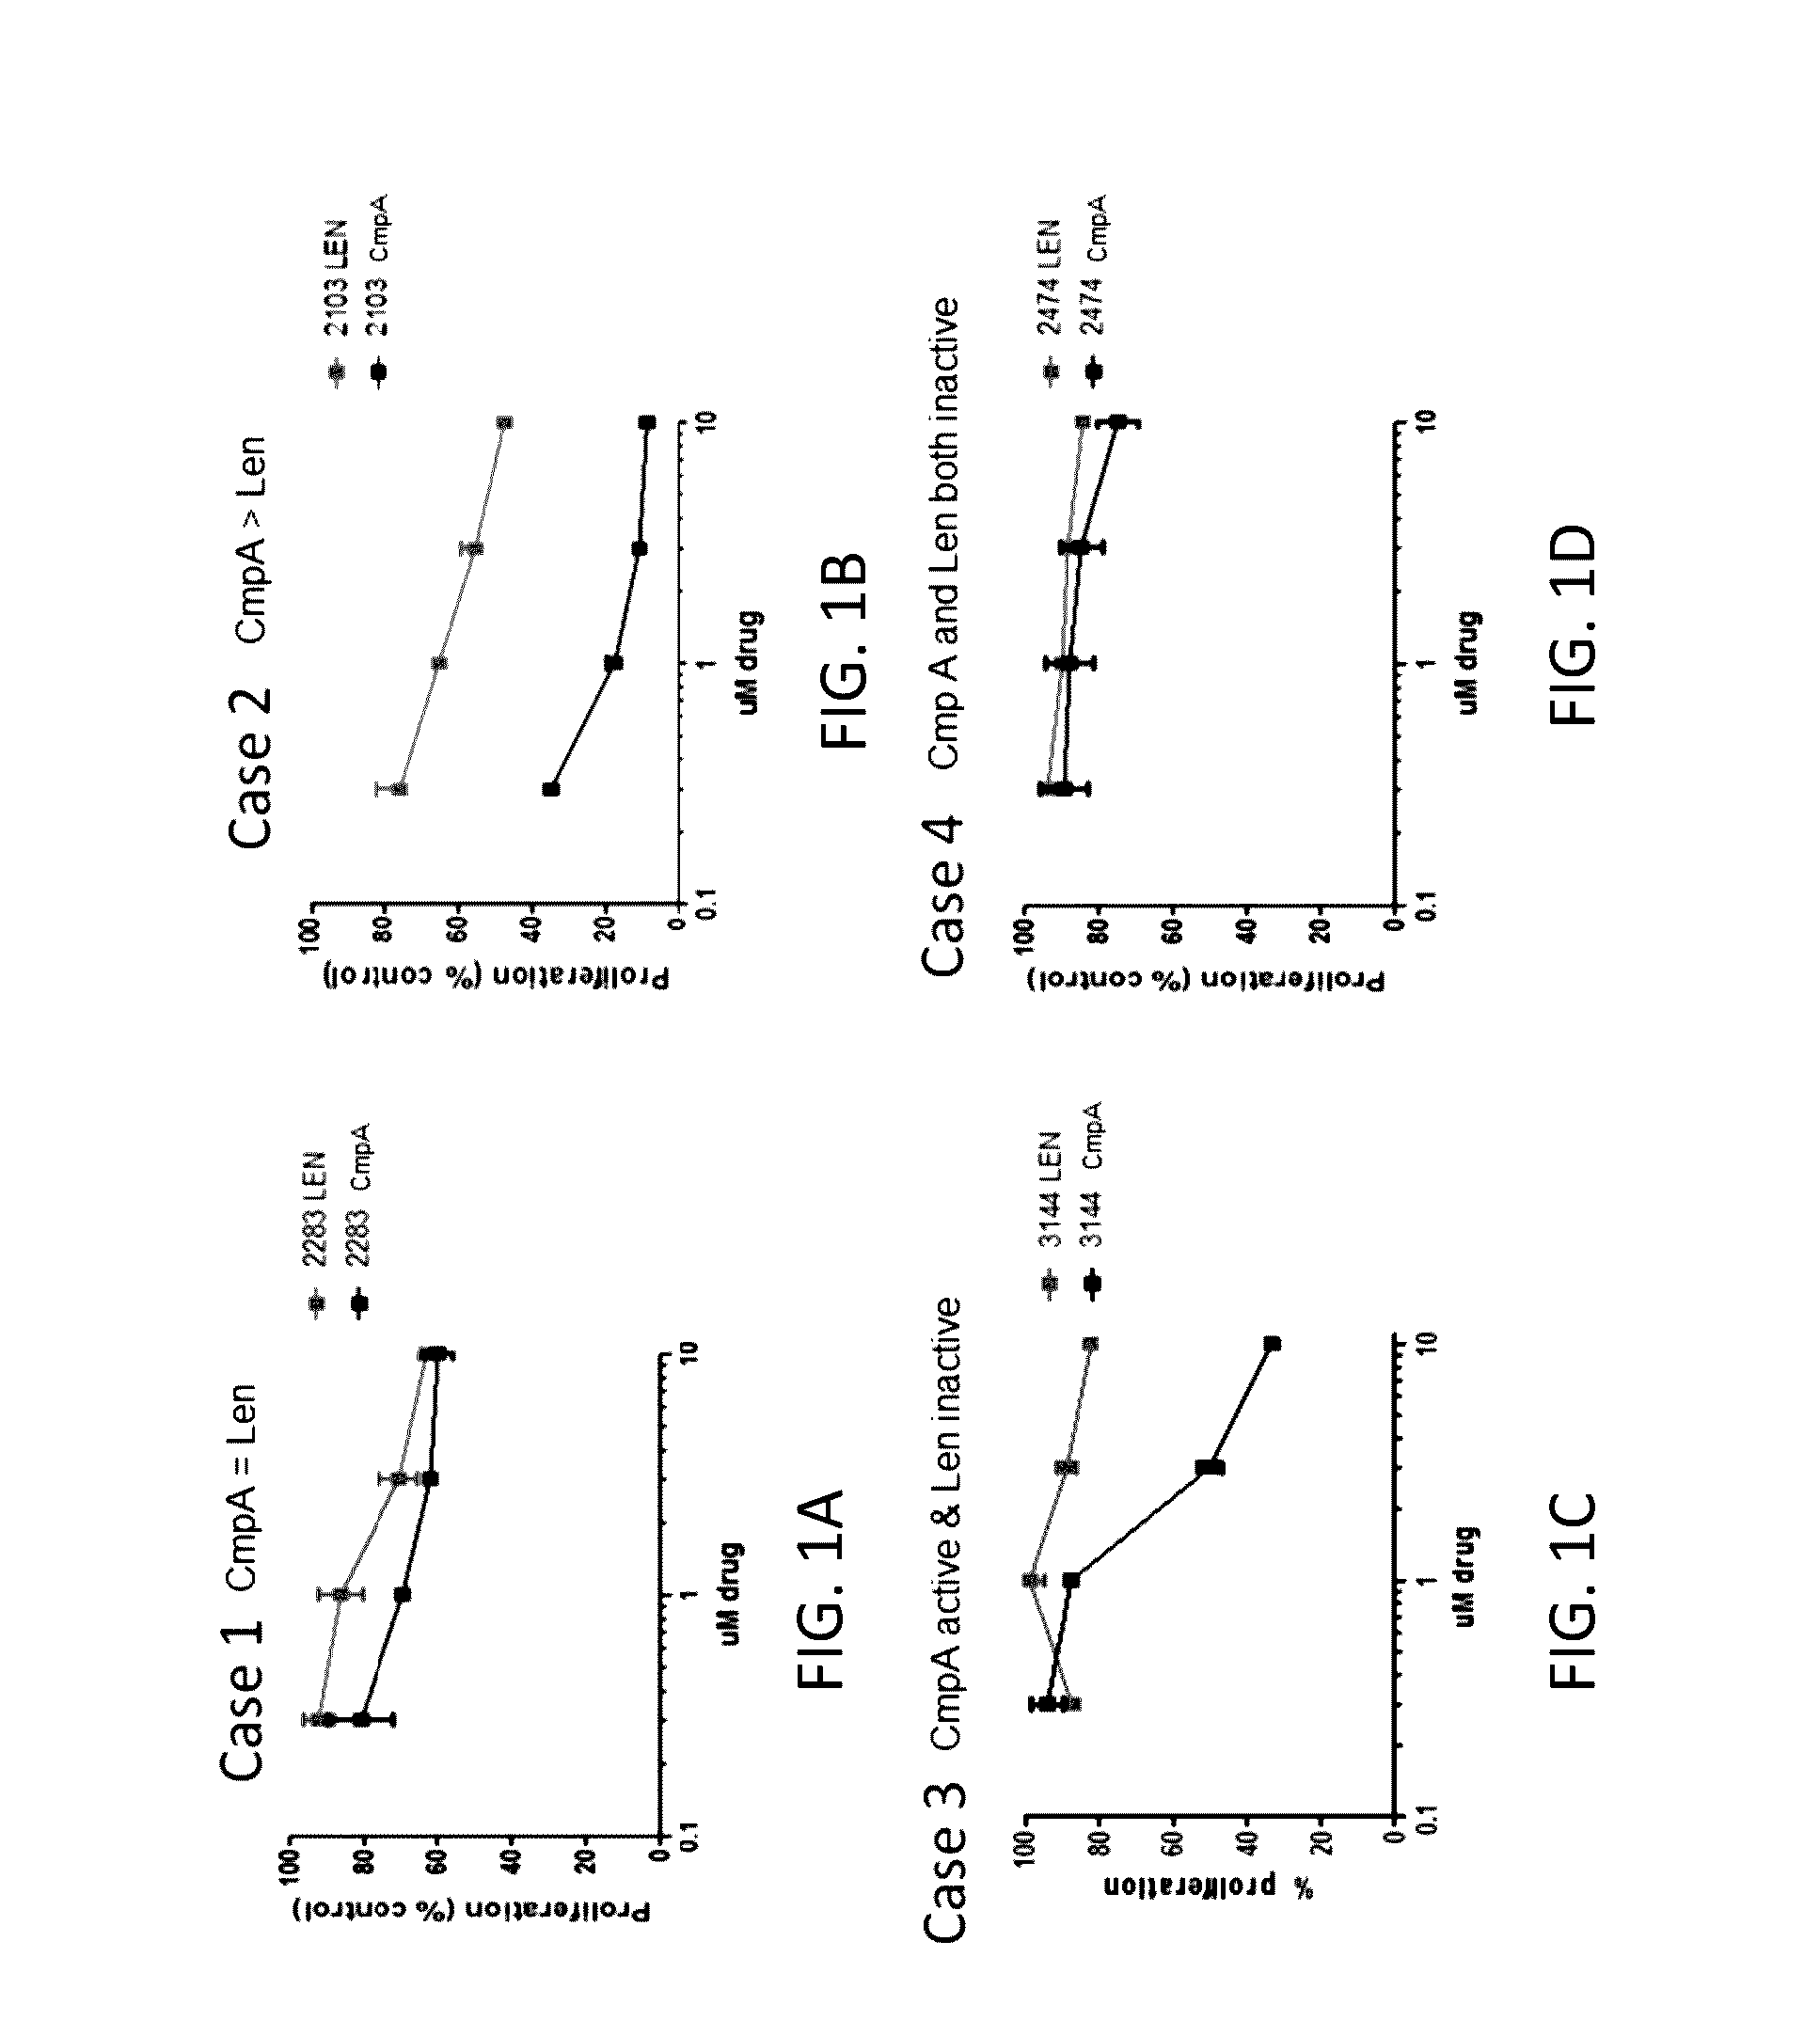 Methods for treating chronic lymphocytic leukemia and the use of biomarkers as a predictor of clinical sensitivity to immunomodulatory therapies